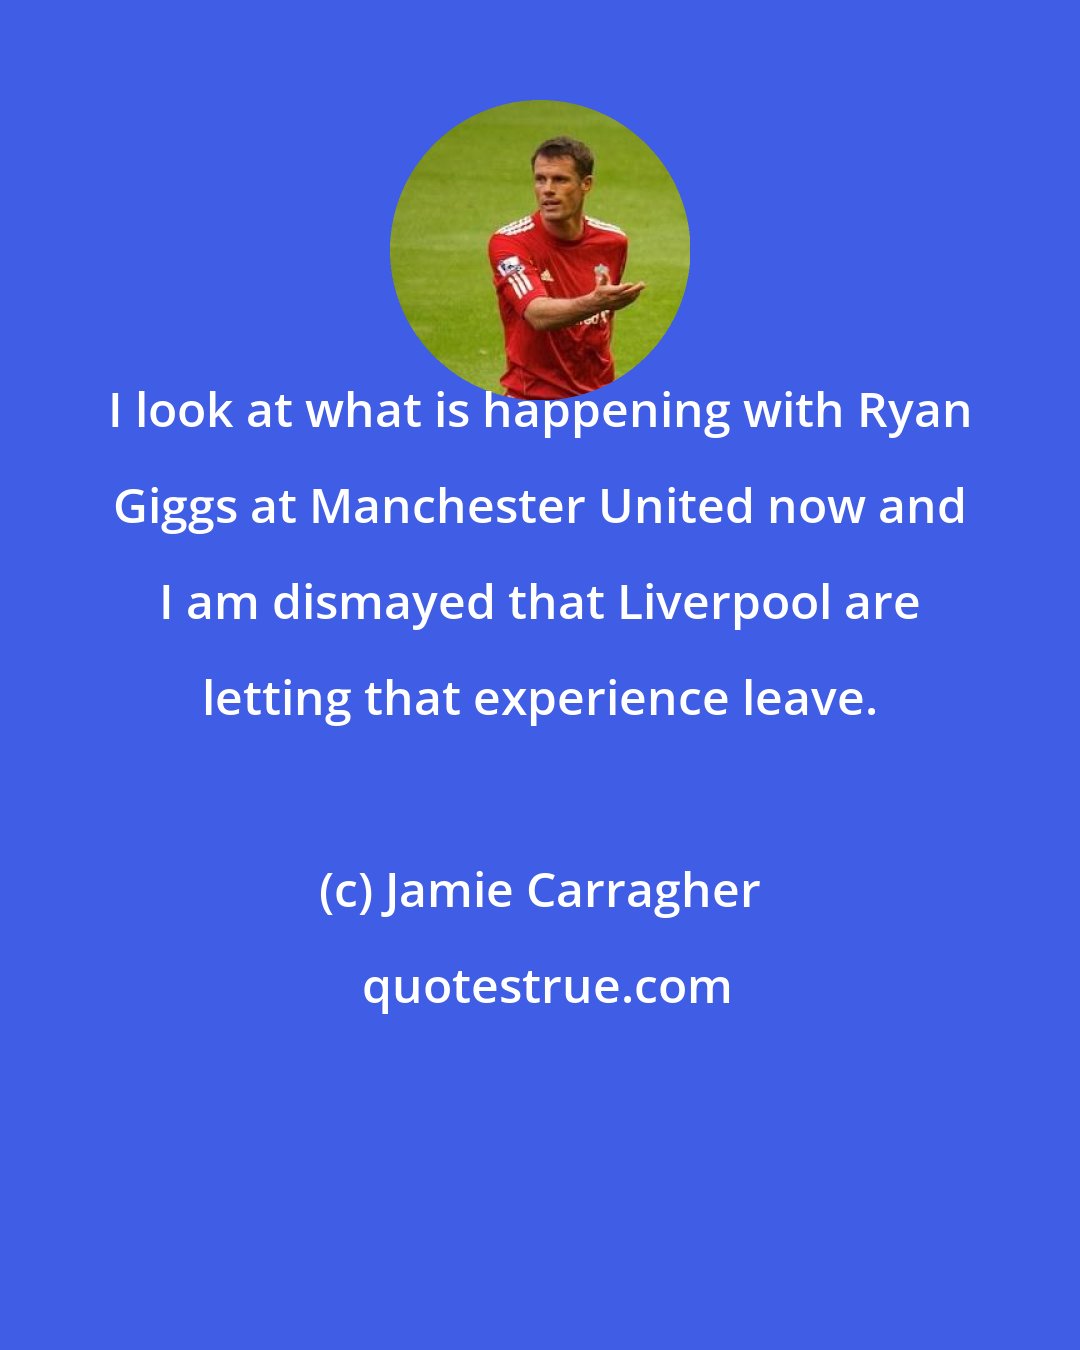 Jamie Carragher: I look at what is happening with Ryan Giggs at Manchester United now and I am dismayed that Liverpool are letting that experience leave.